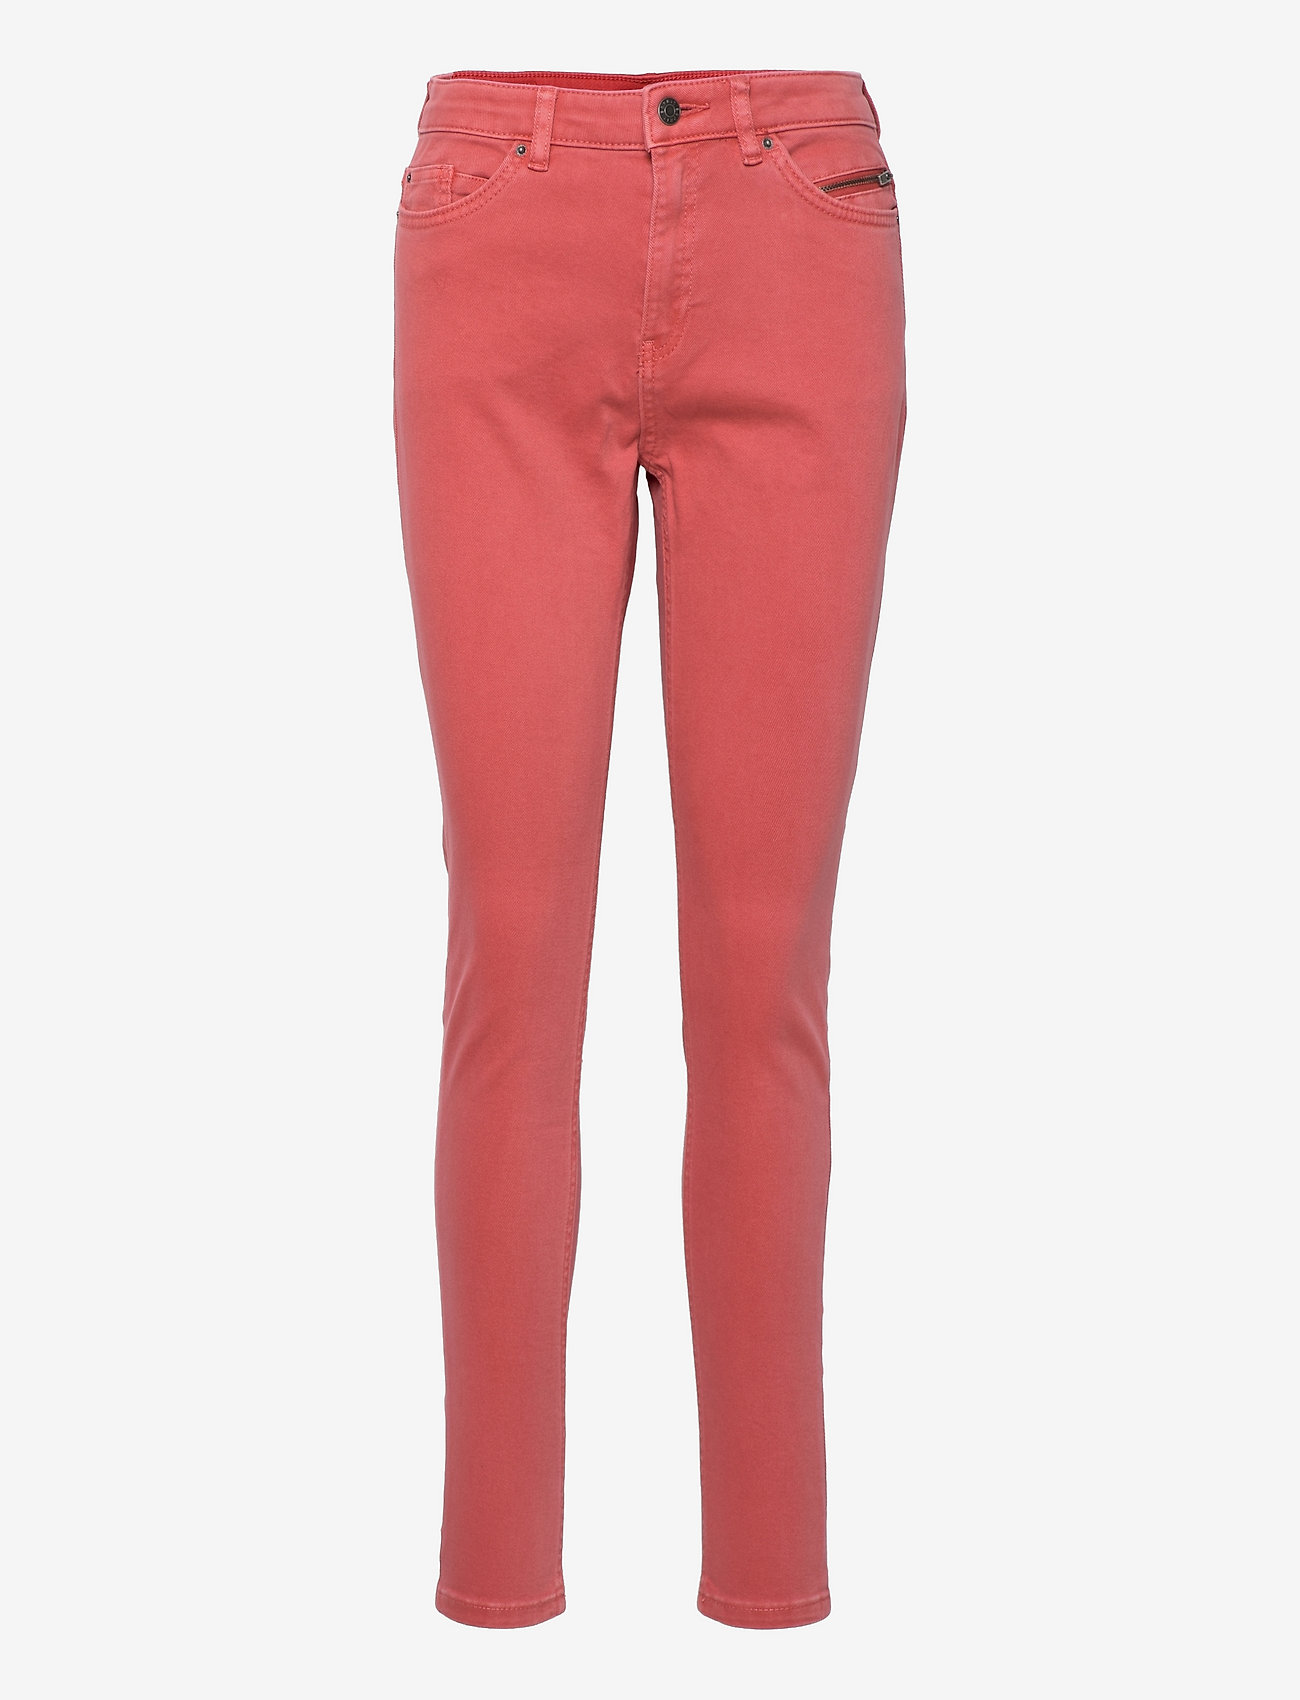 Esprit Casual - Stretch trousers with zip detail - slim jeans - coral - 0